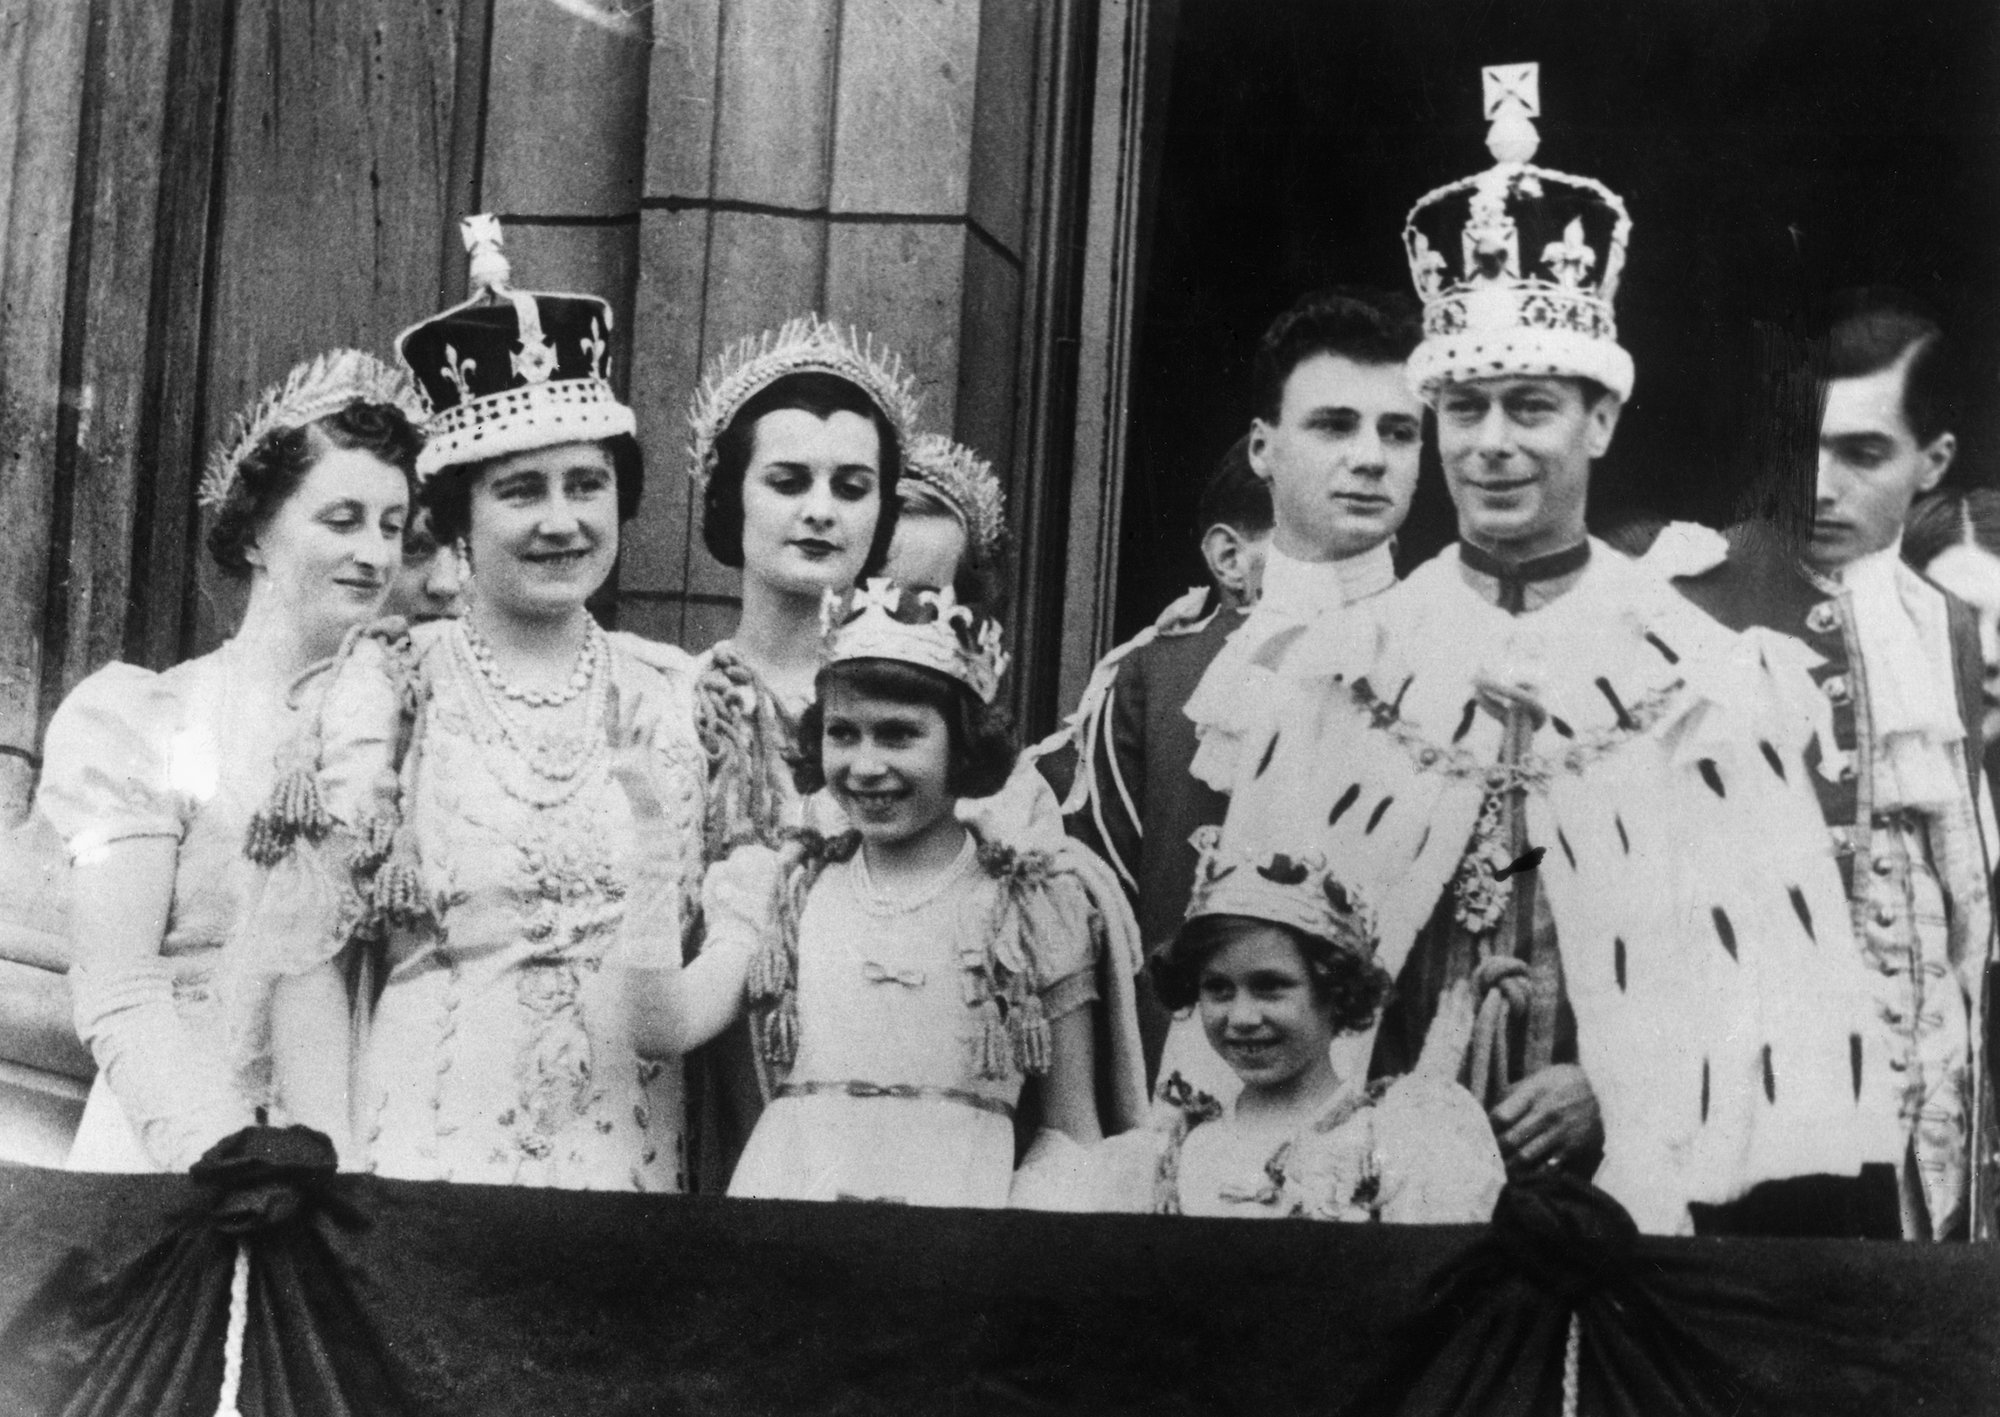 The British Royal Family appearing on the Buckingham Palace balcony and greeting the crowd after the coronation of George VI. London, 12th May 1937 